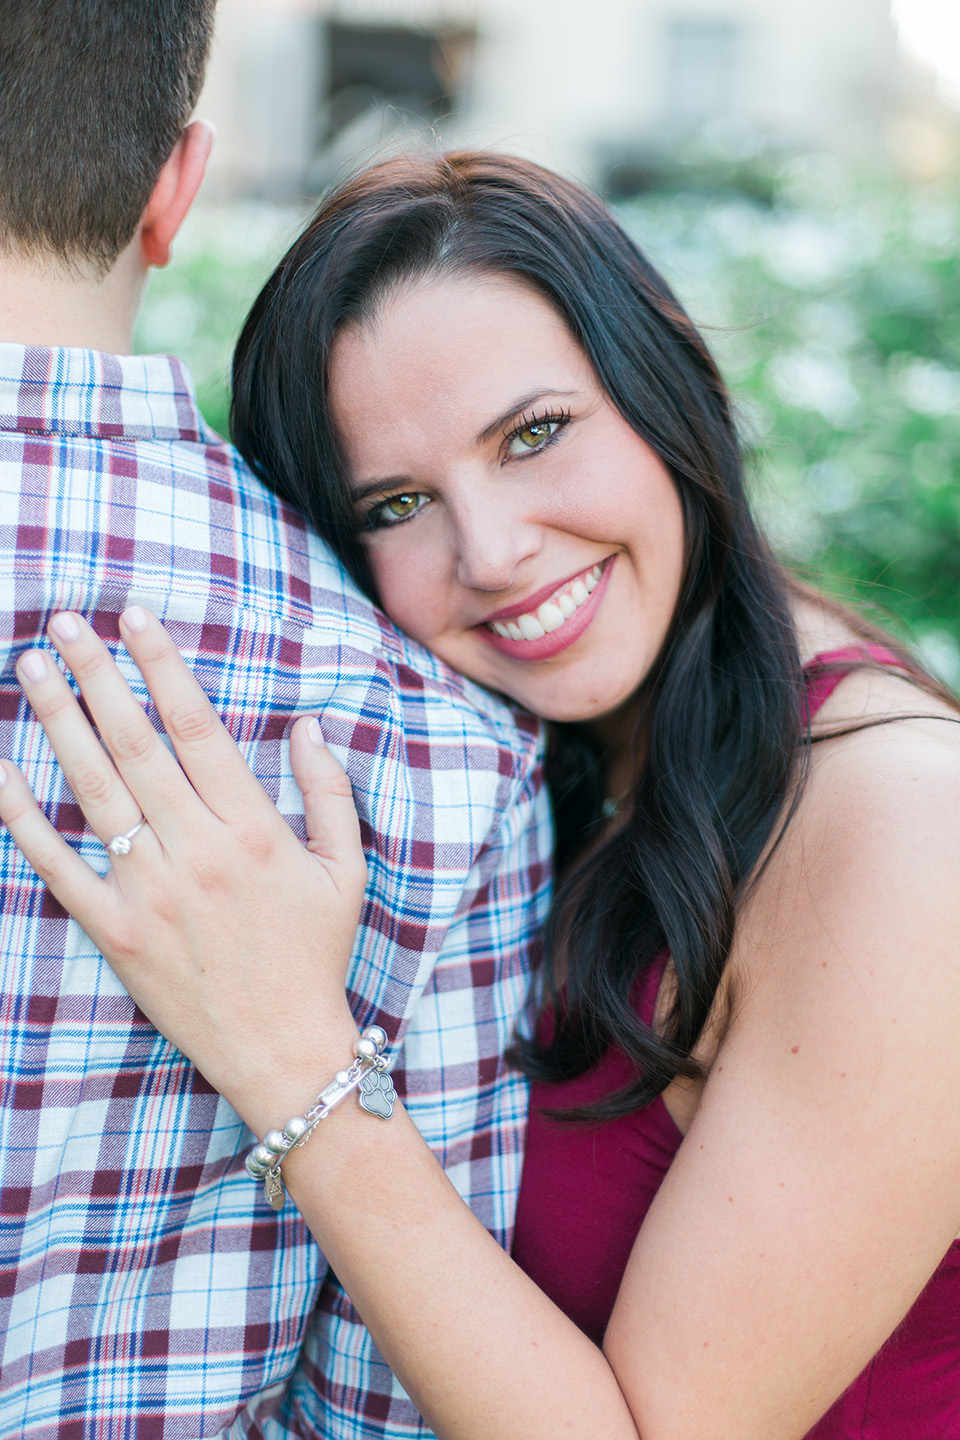 Image of an engaged couple in downtown Orlando, Florida.  She is smiling radiantly while cuddling into her fiance.